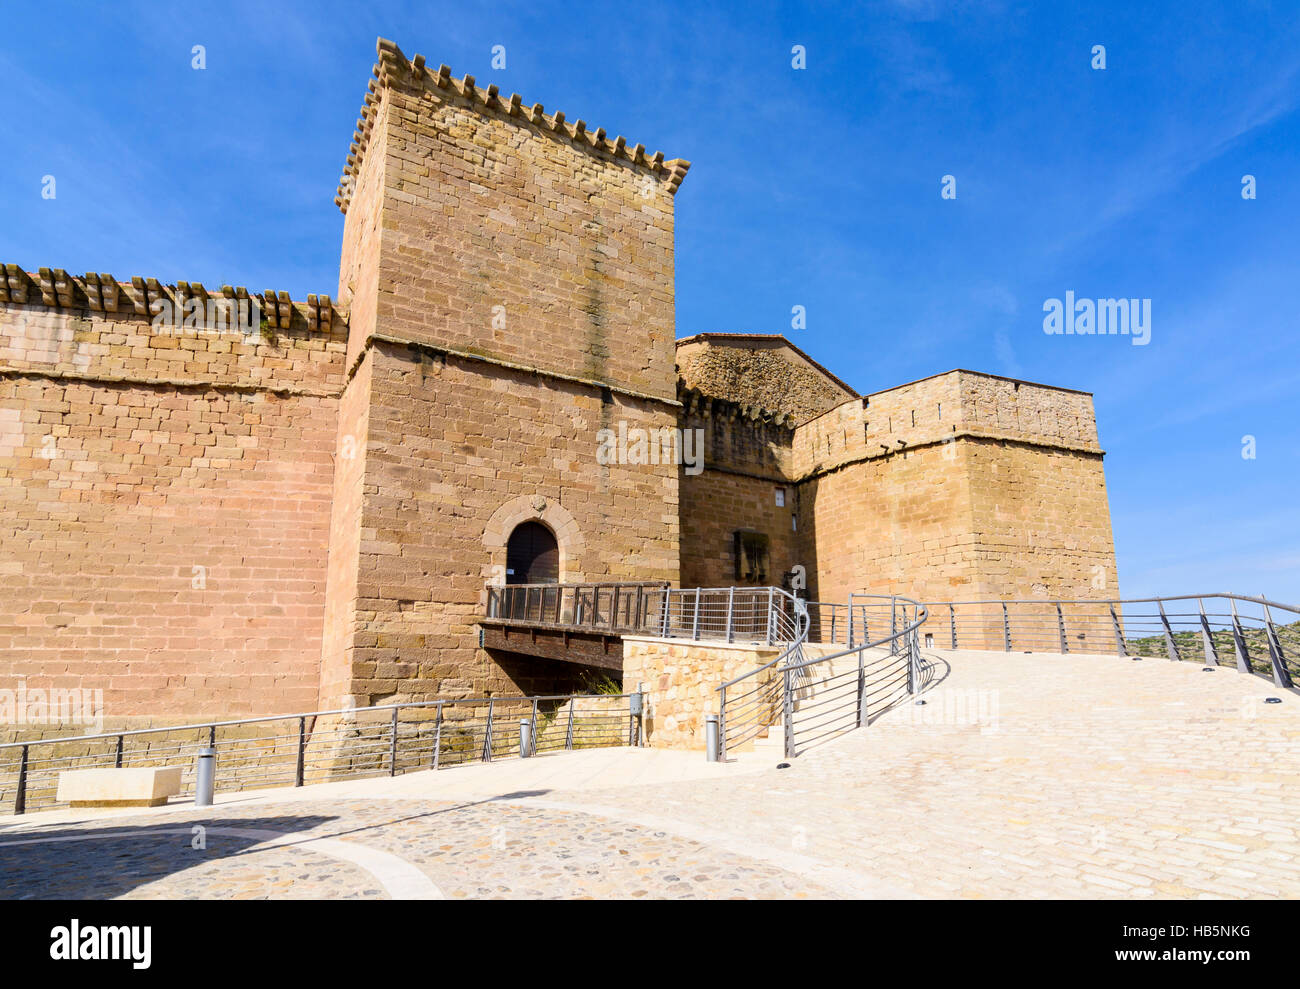 North gate and tower of the Castle of Mora de Rubielos, Aragon, Spain Stock Photo